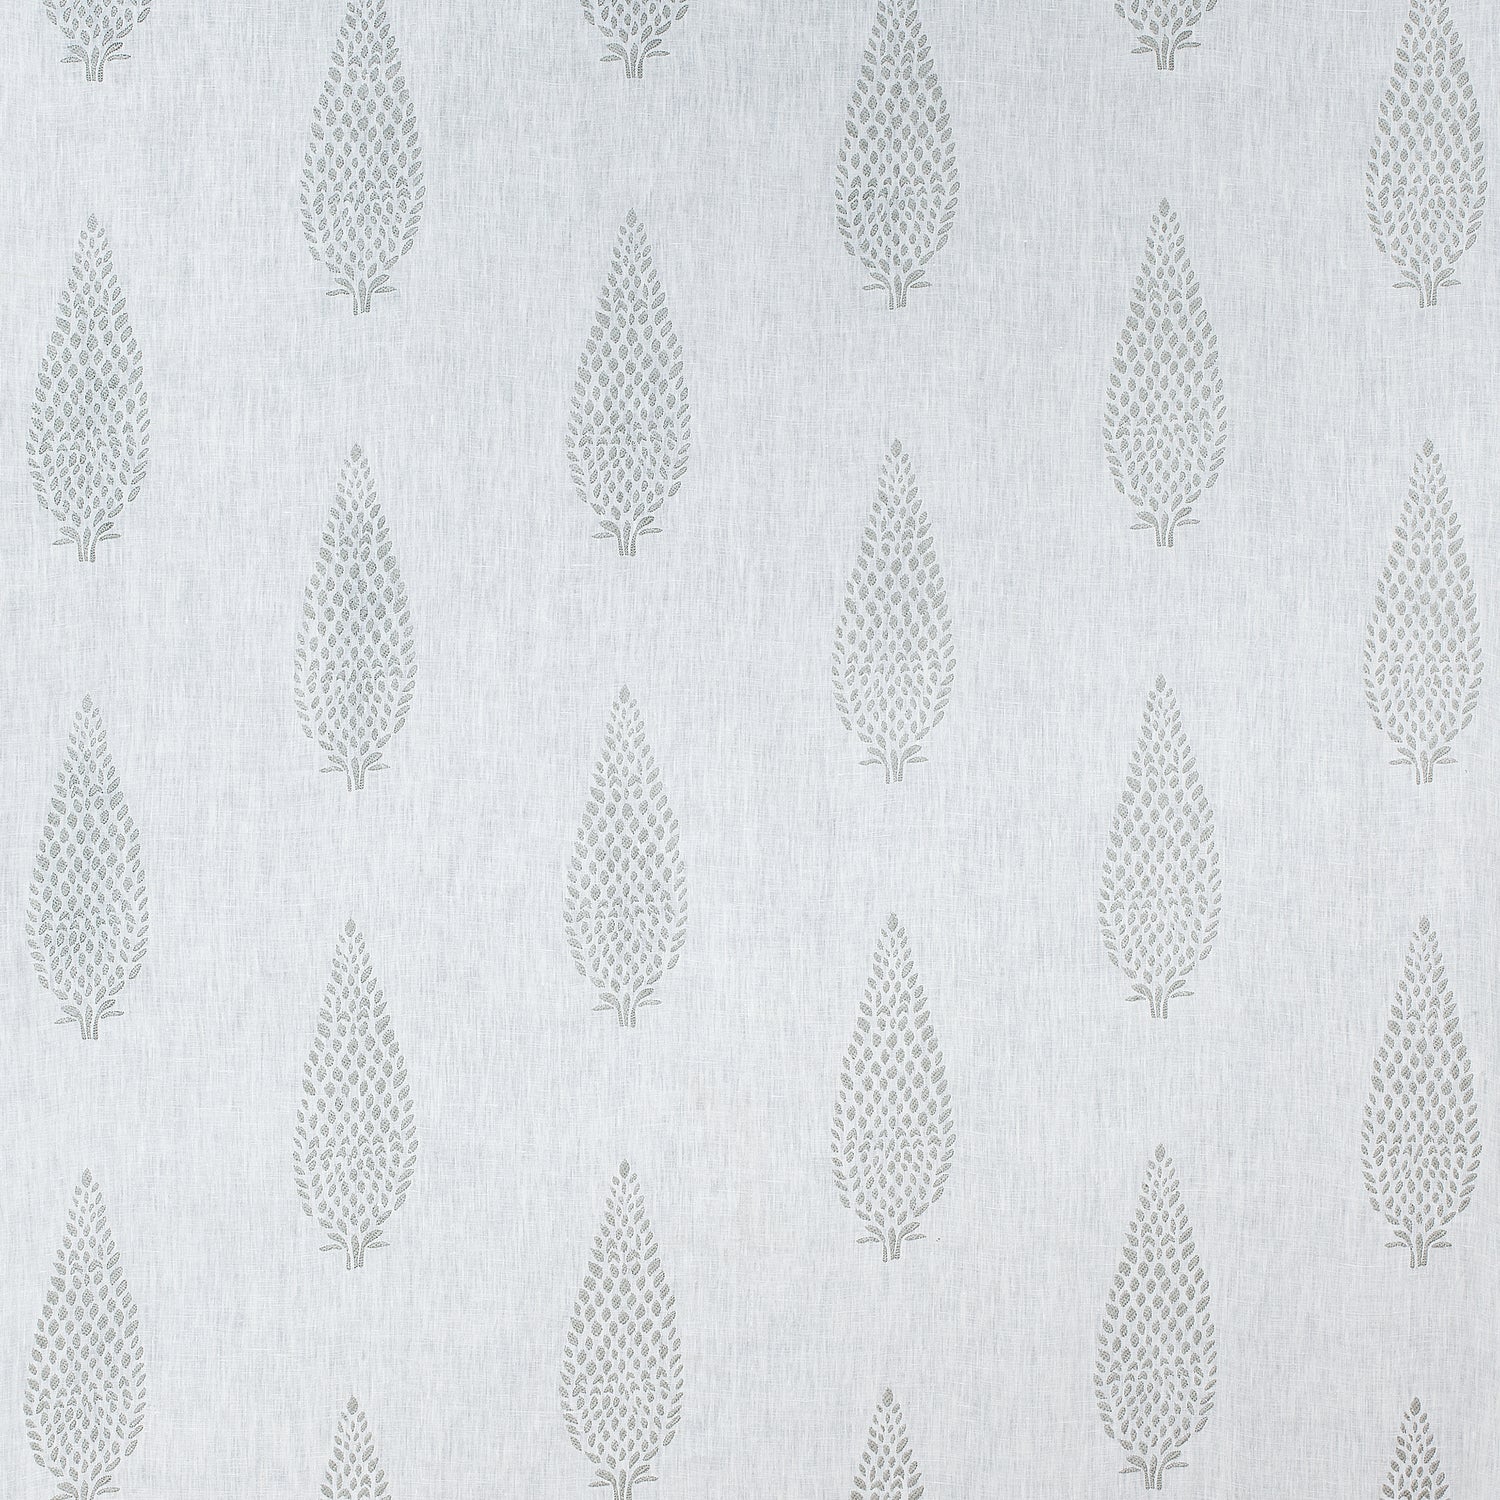 Manor Embroidery fabric in grey on off white color - pattern number AW73006 - by Anna French in the Meridian collection